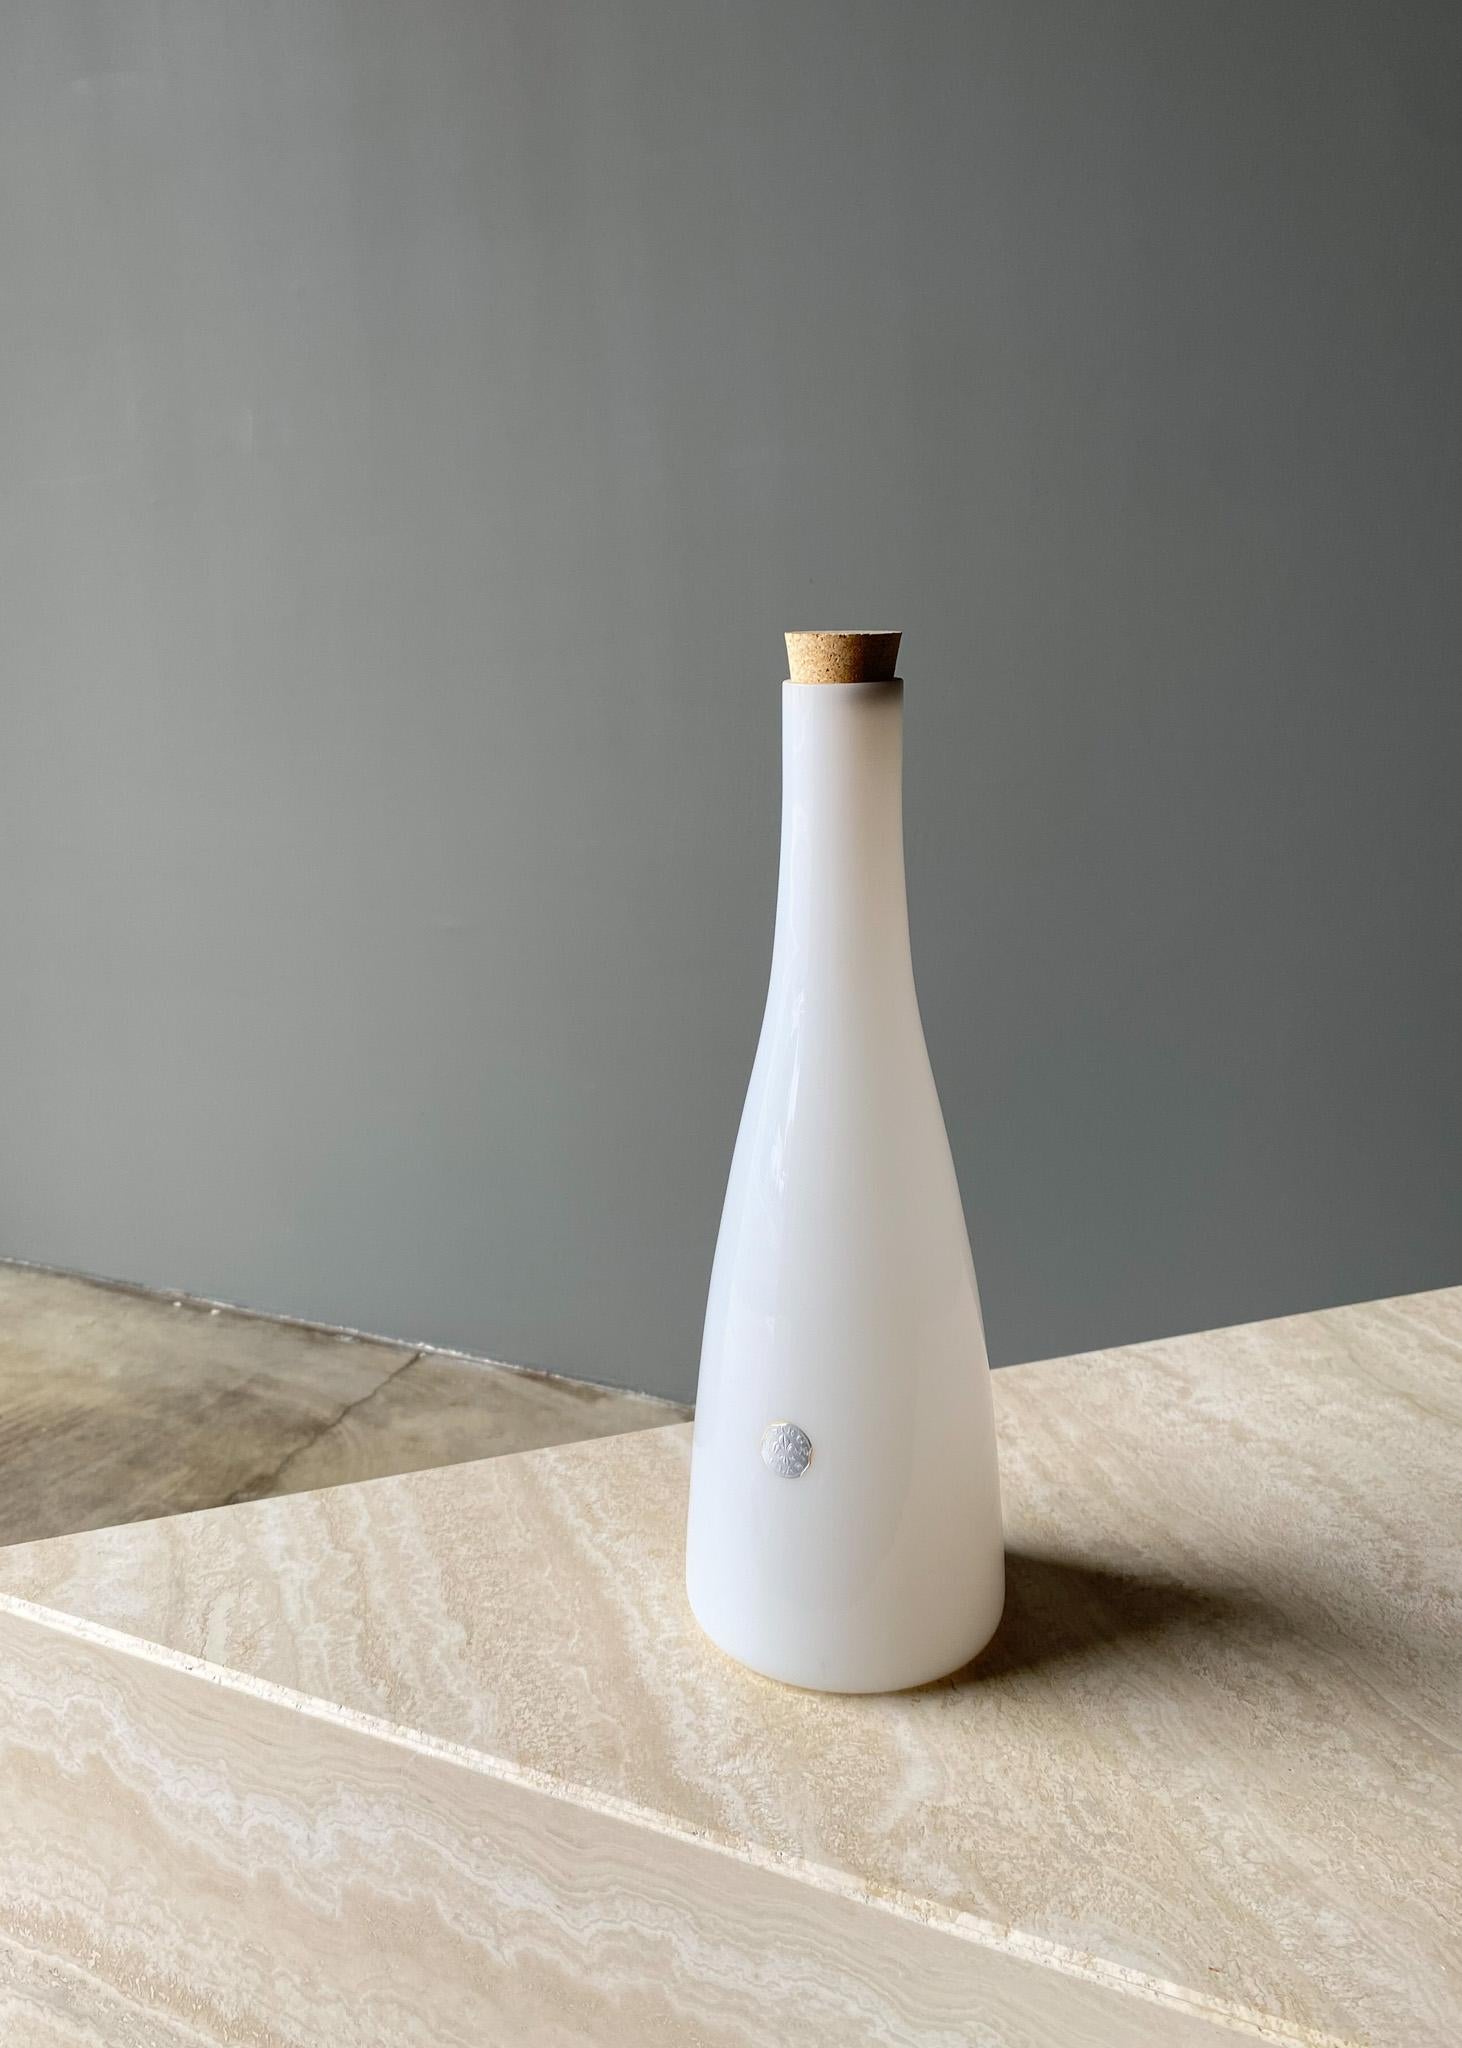 Jacob Bang White Glass Vase / Decanter for Kastrup, Denmark, 1960s In Good Condition For Sale In Costa Mesa, CA